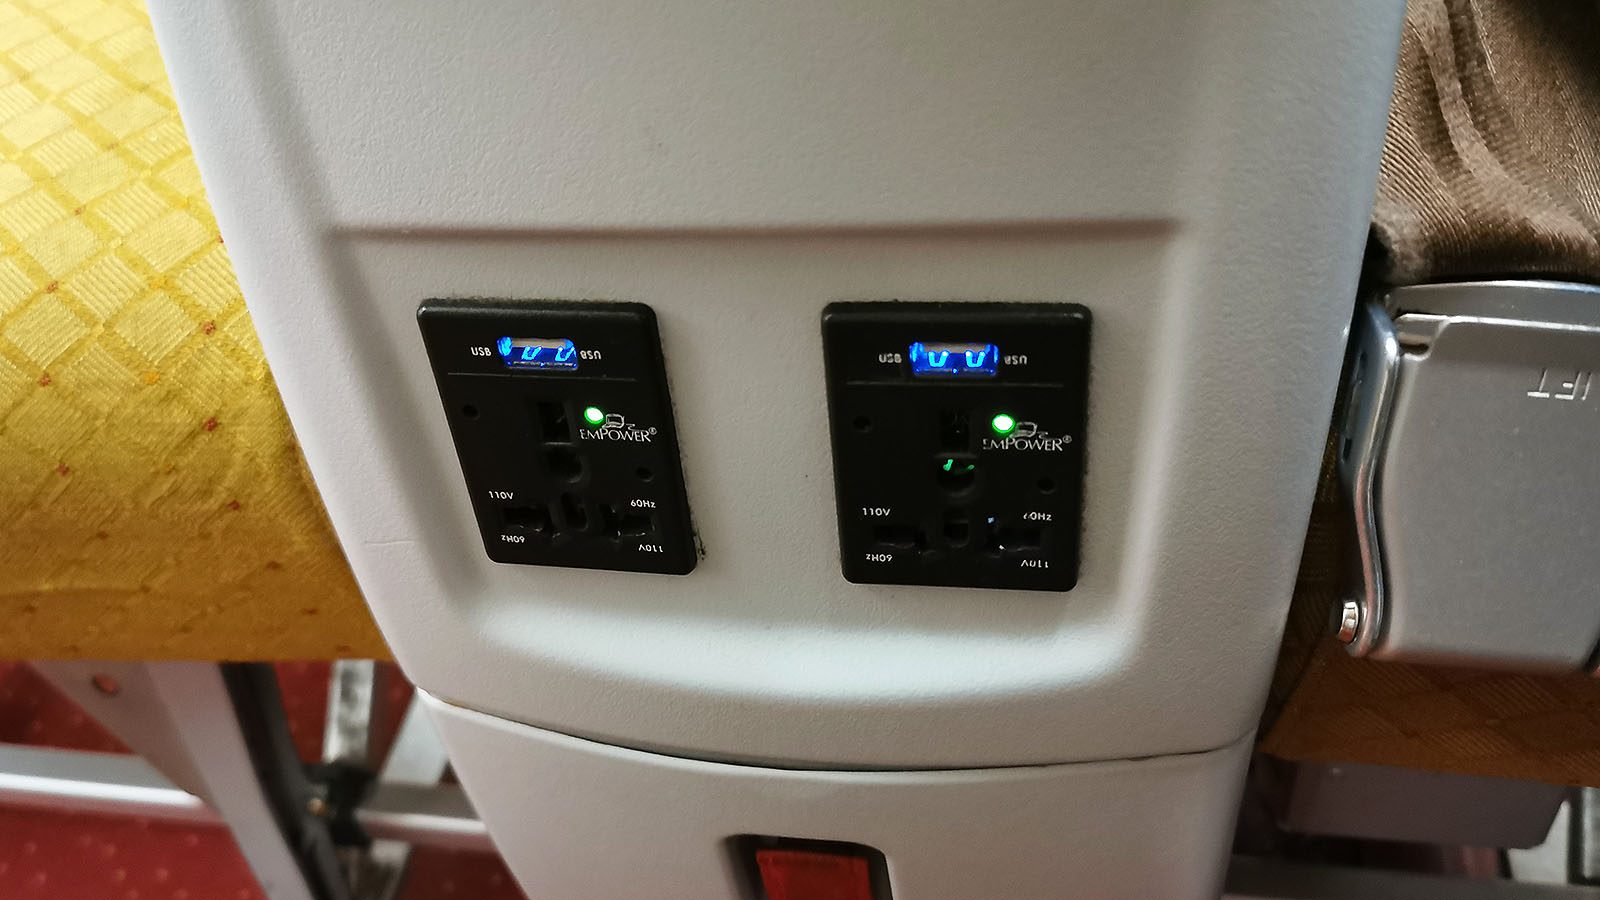 Stay powered up in Air India A320neo Business Class